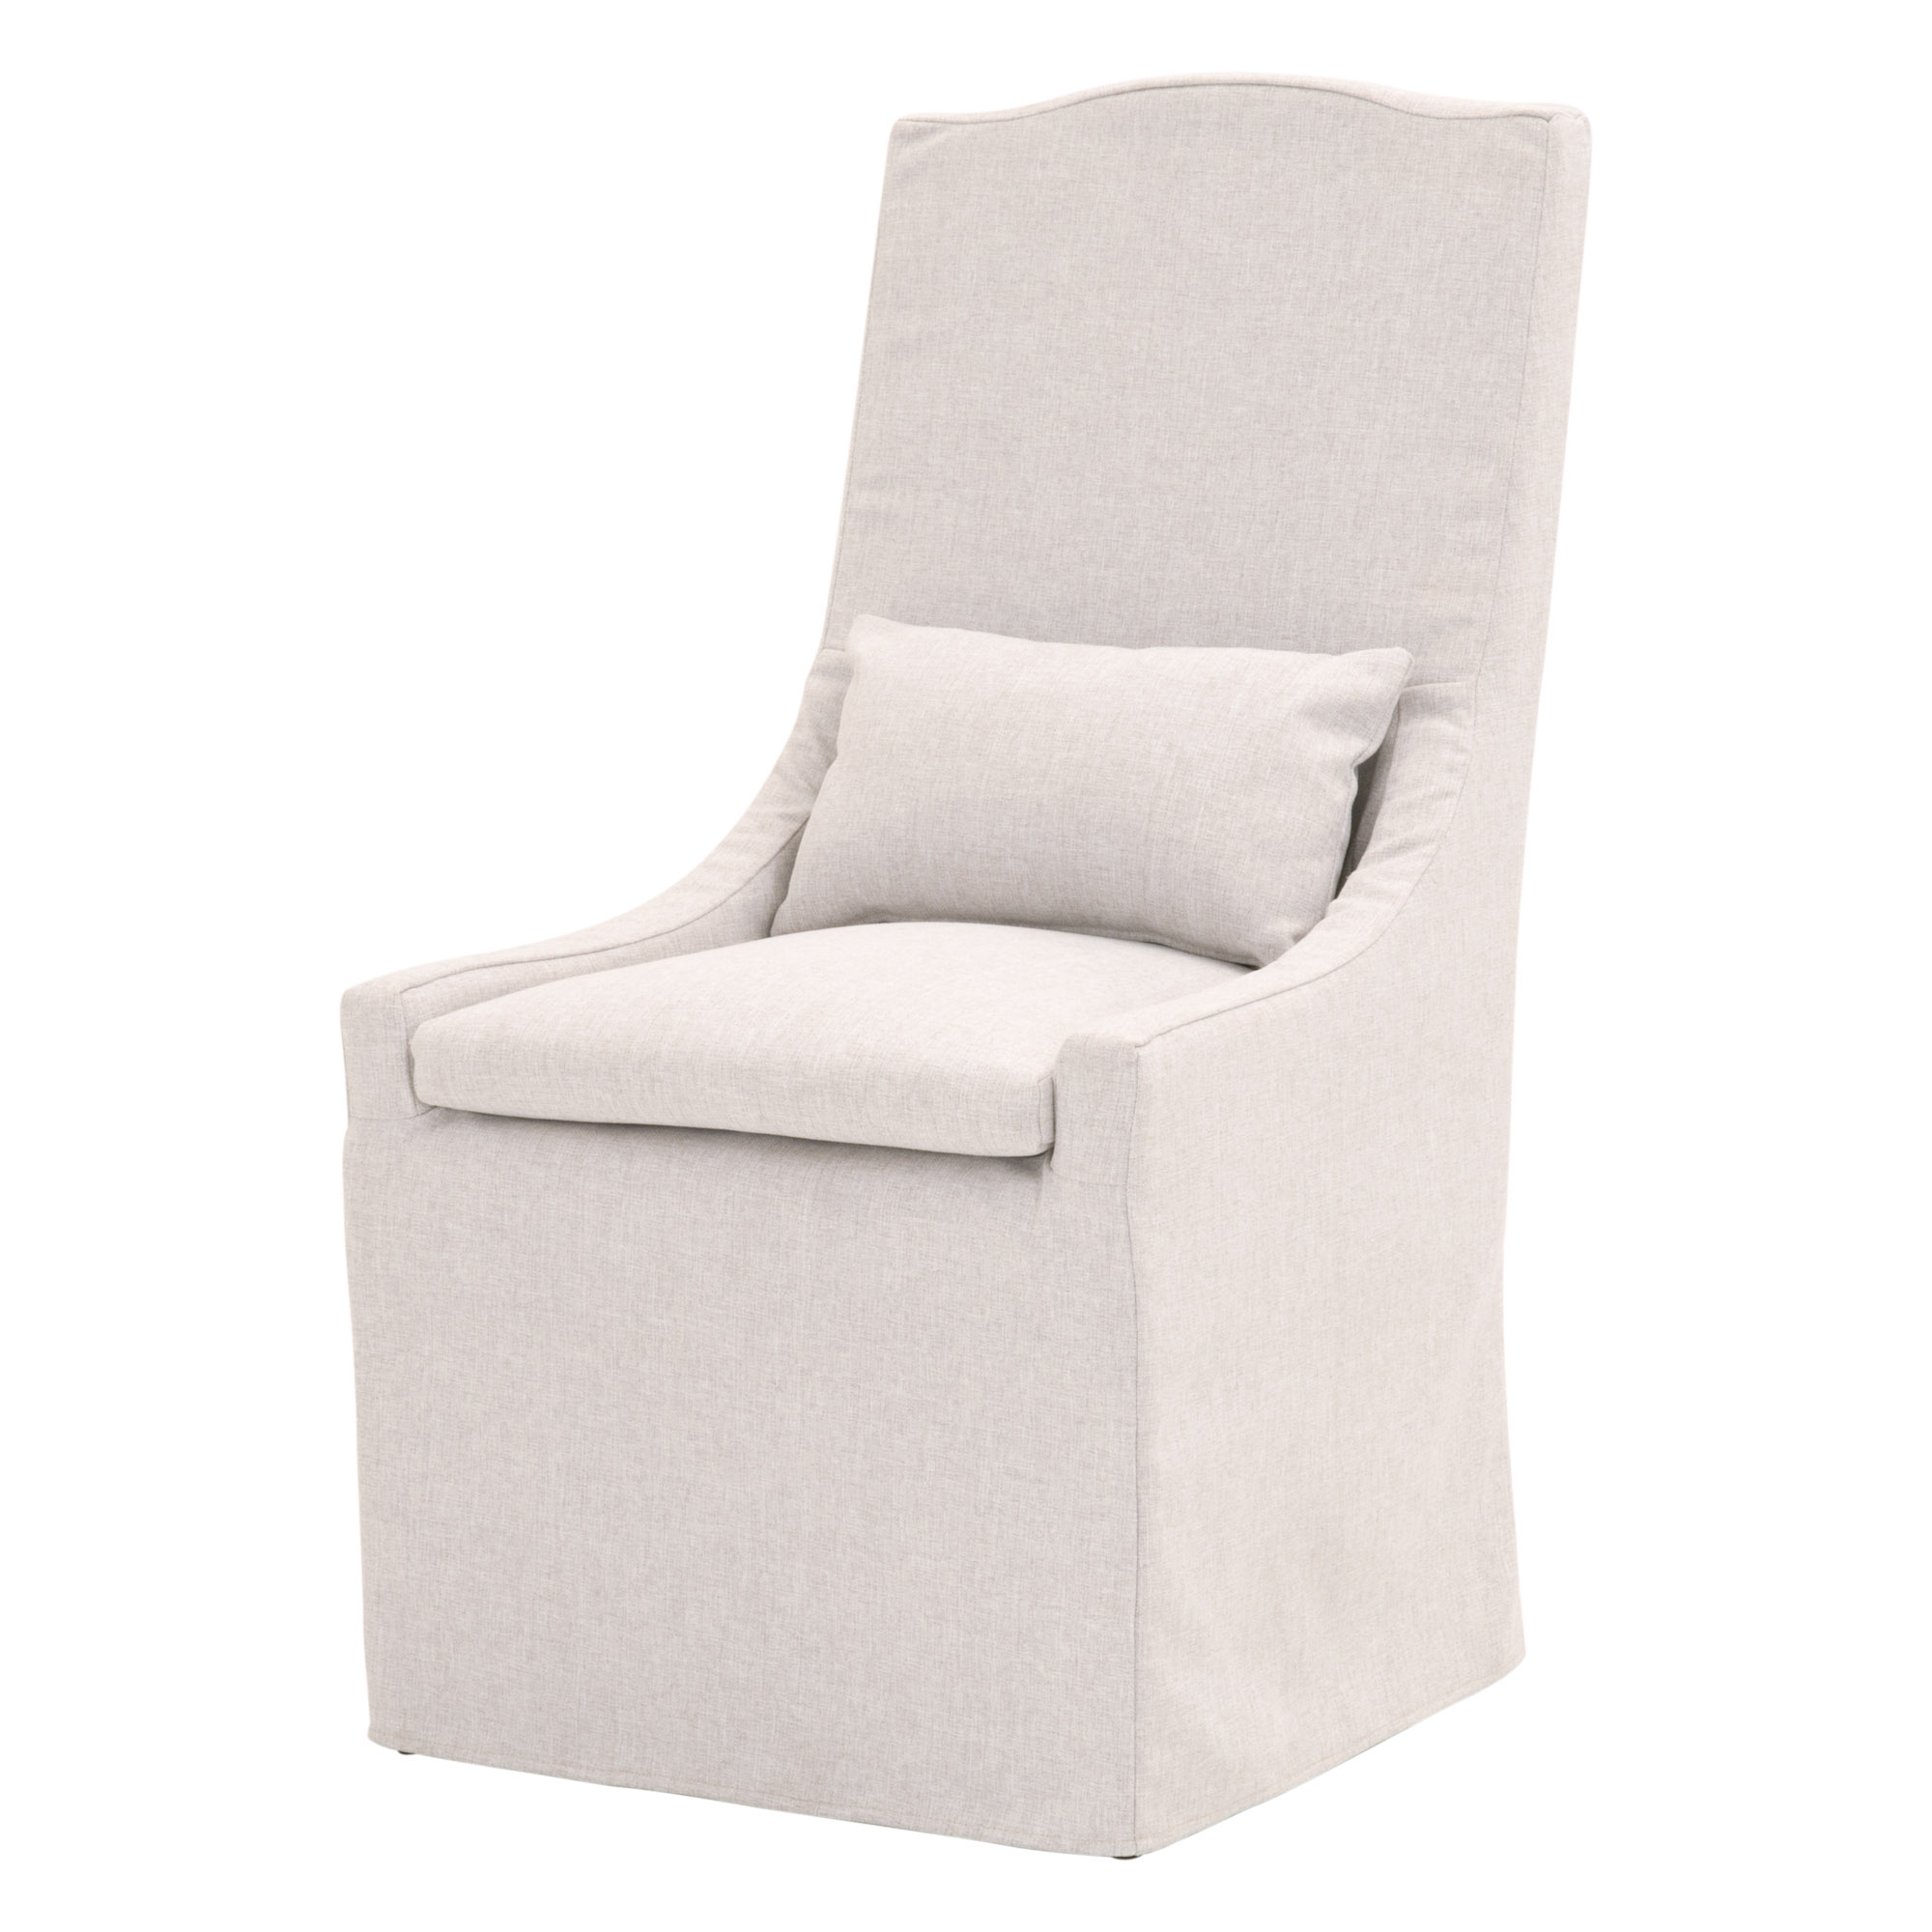 Odessa Outdoor Slipcover Dining Chair, White - Image 0